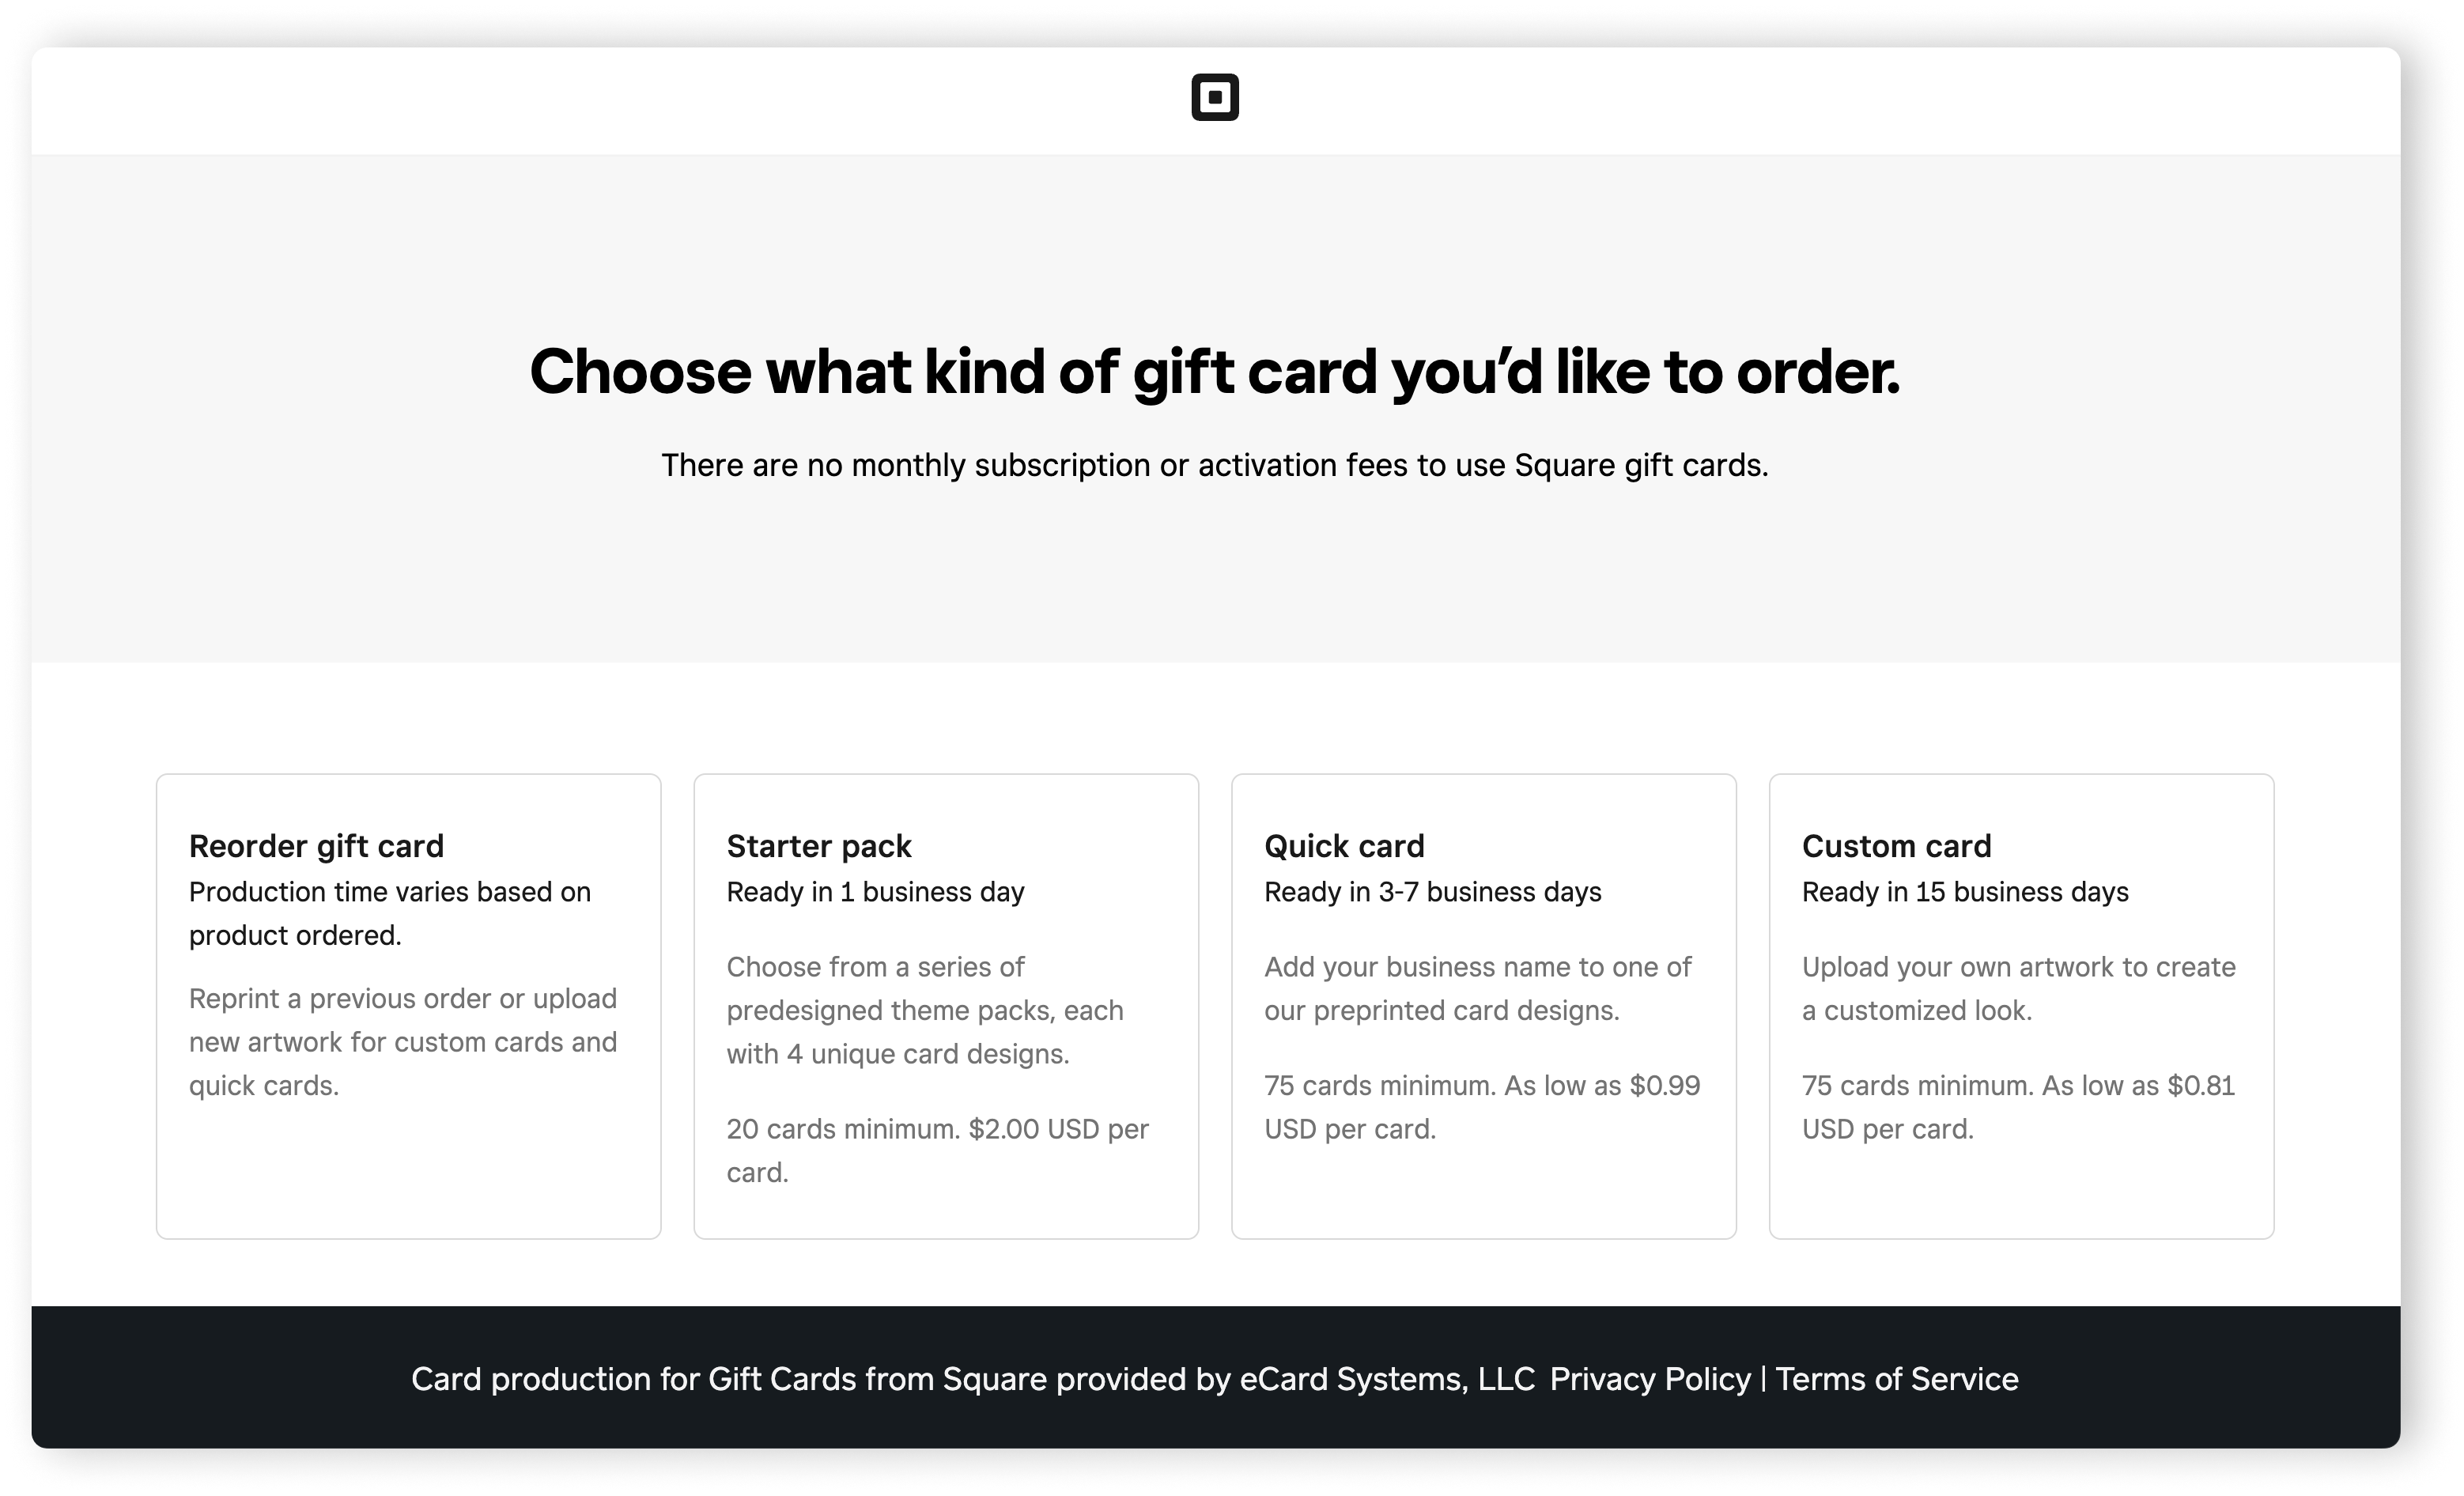 Apple retail gift cards arrive in third-party stores for the